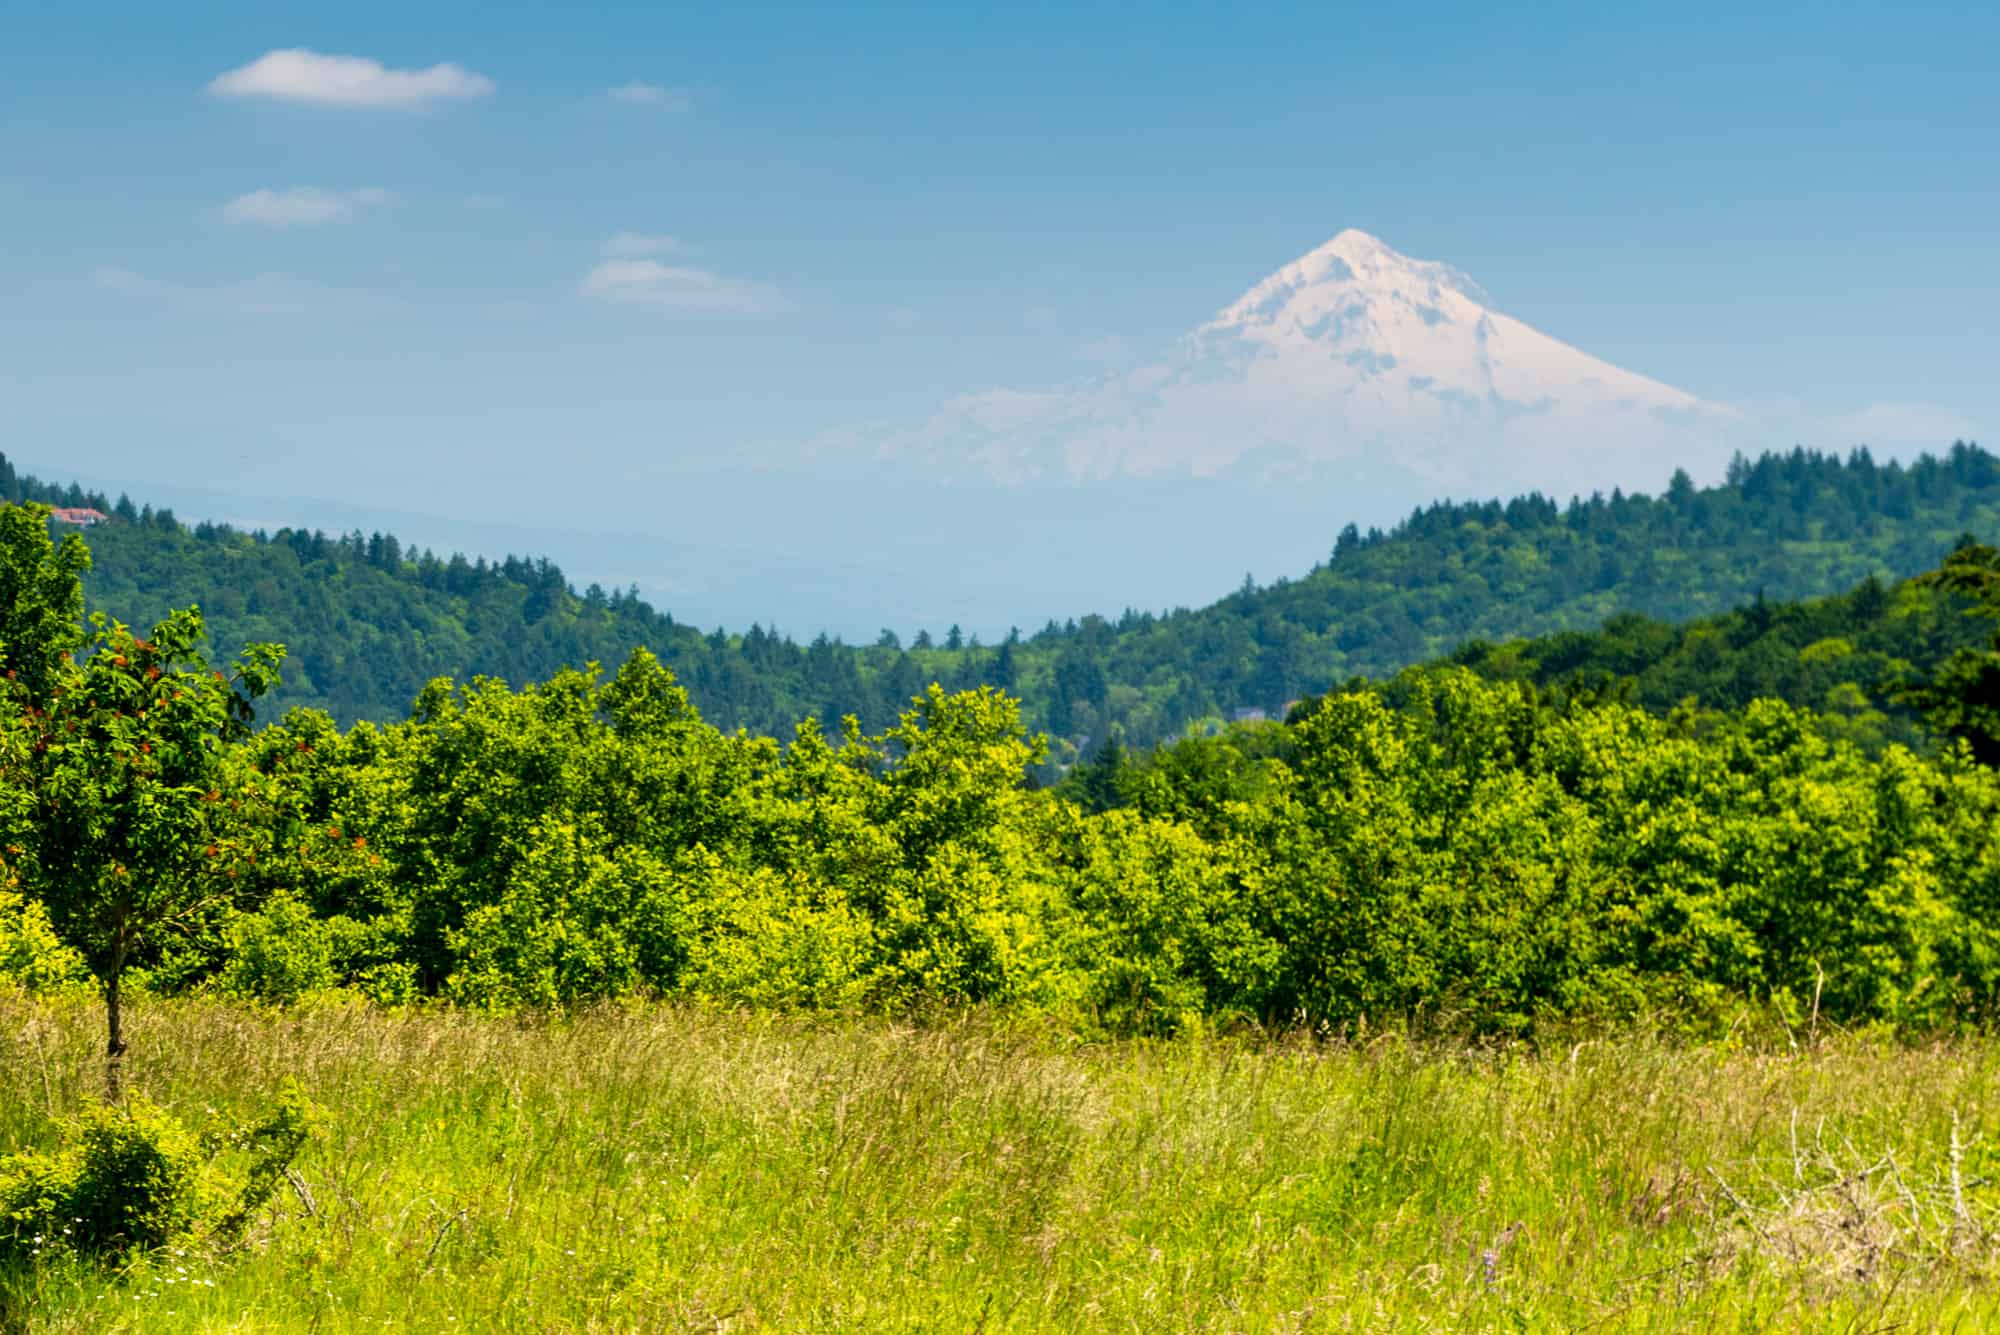 Powell Butte Nature Park in southeast Portland with Mt. Hood in the background.